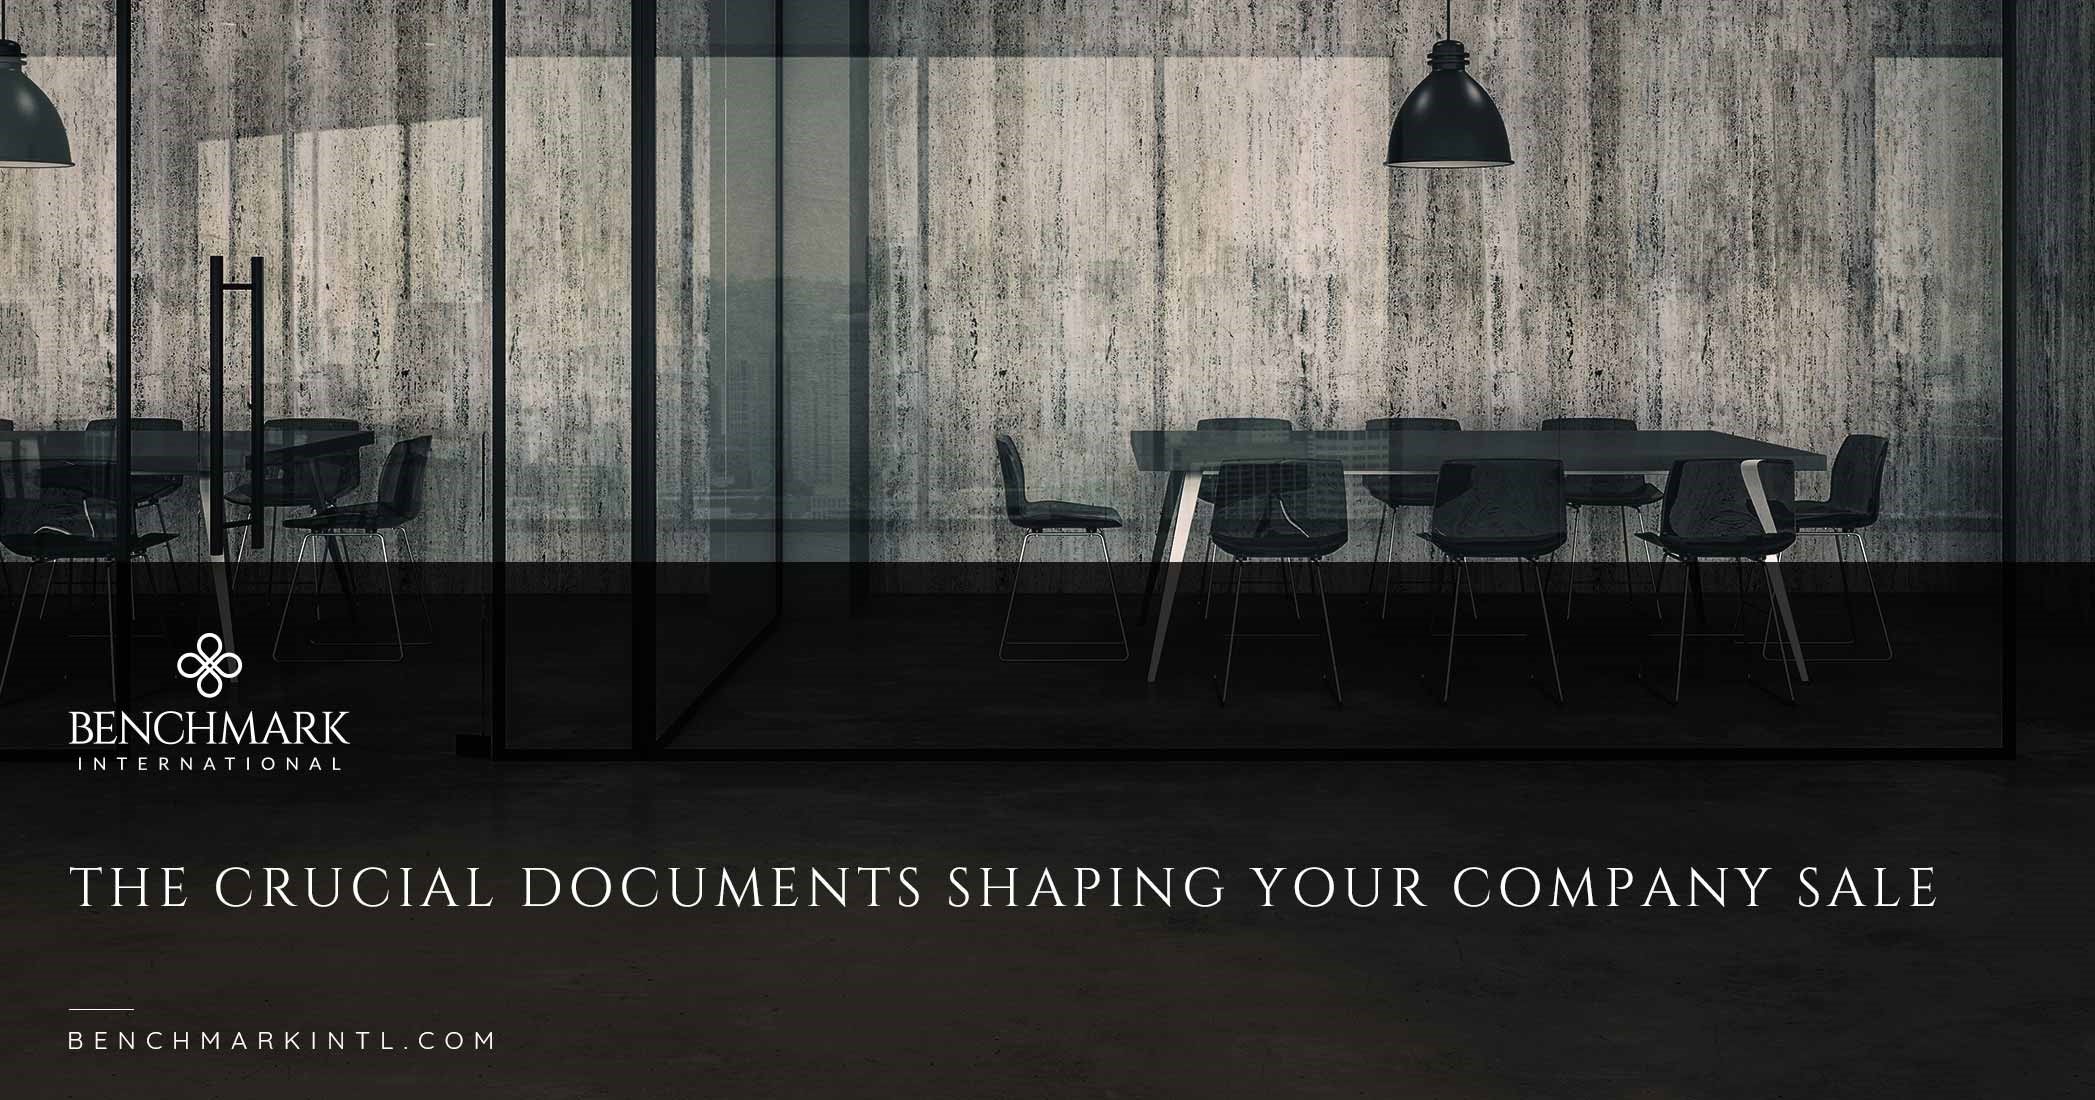 The Crucial Documents Shaping Your Company Sale